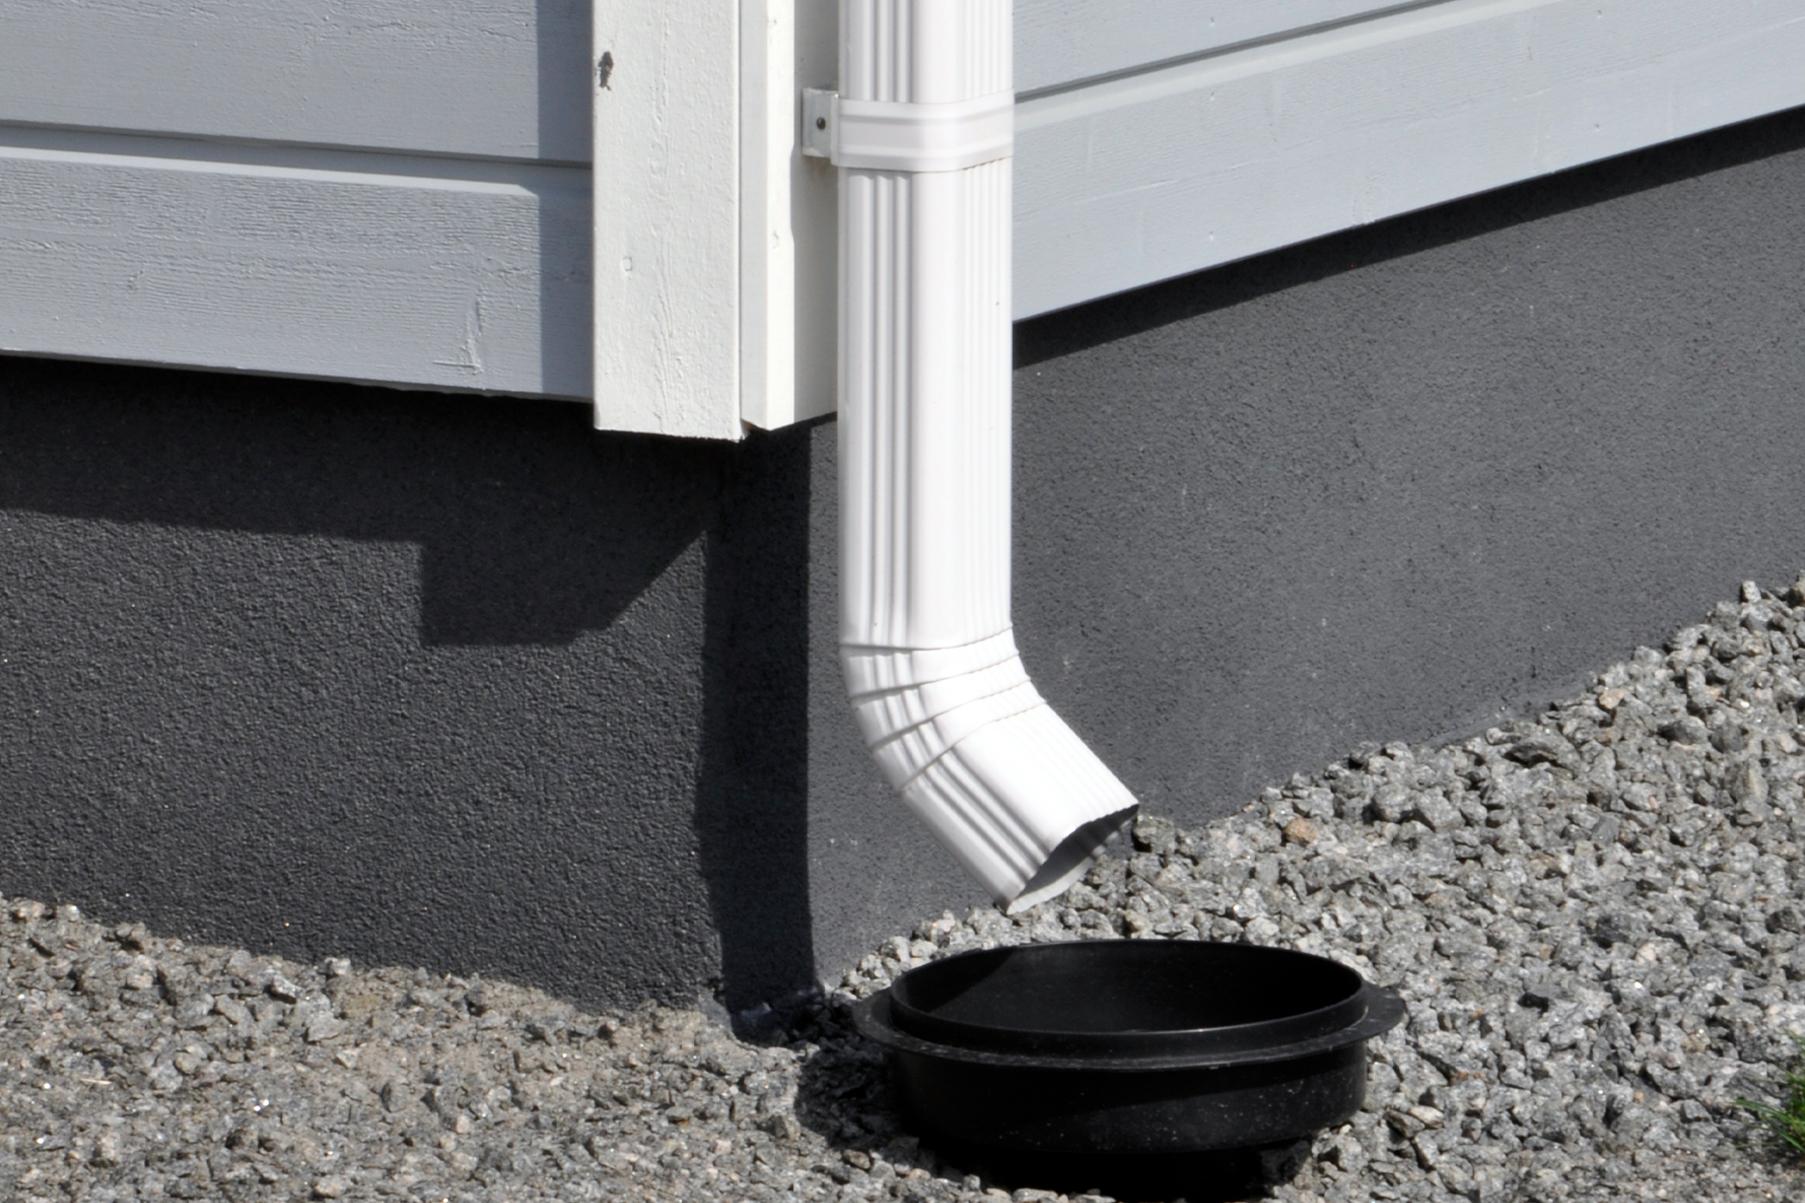 End pipe of the K-style rainwater system is correctly aimed at the rainwater drain. This prevents water from splashing into the house structures.